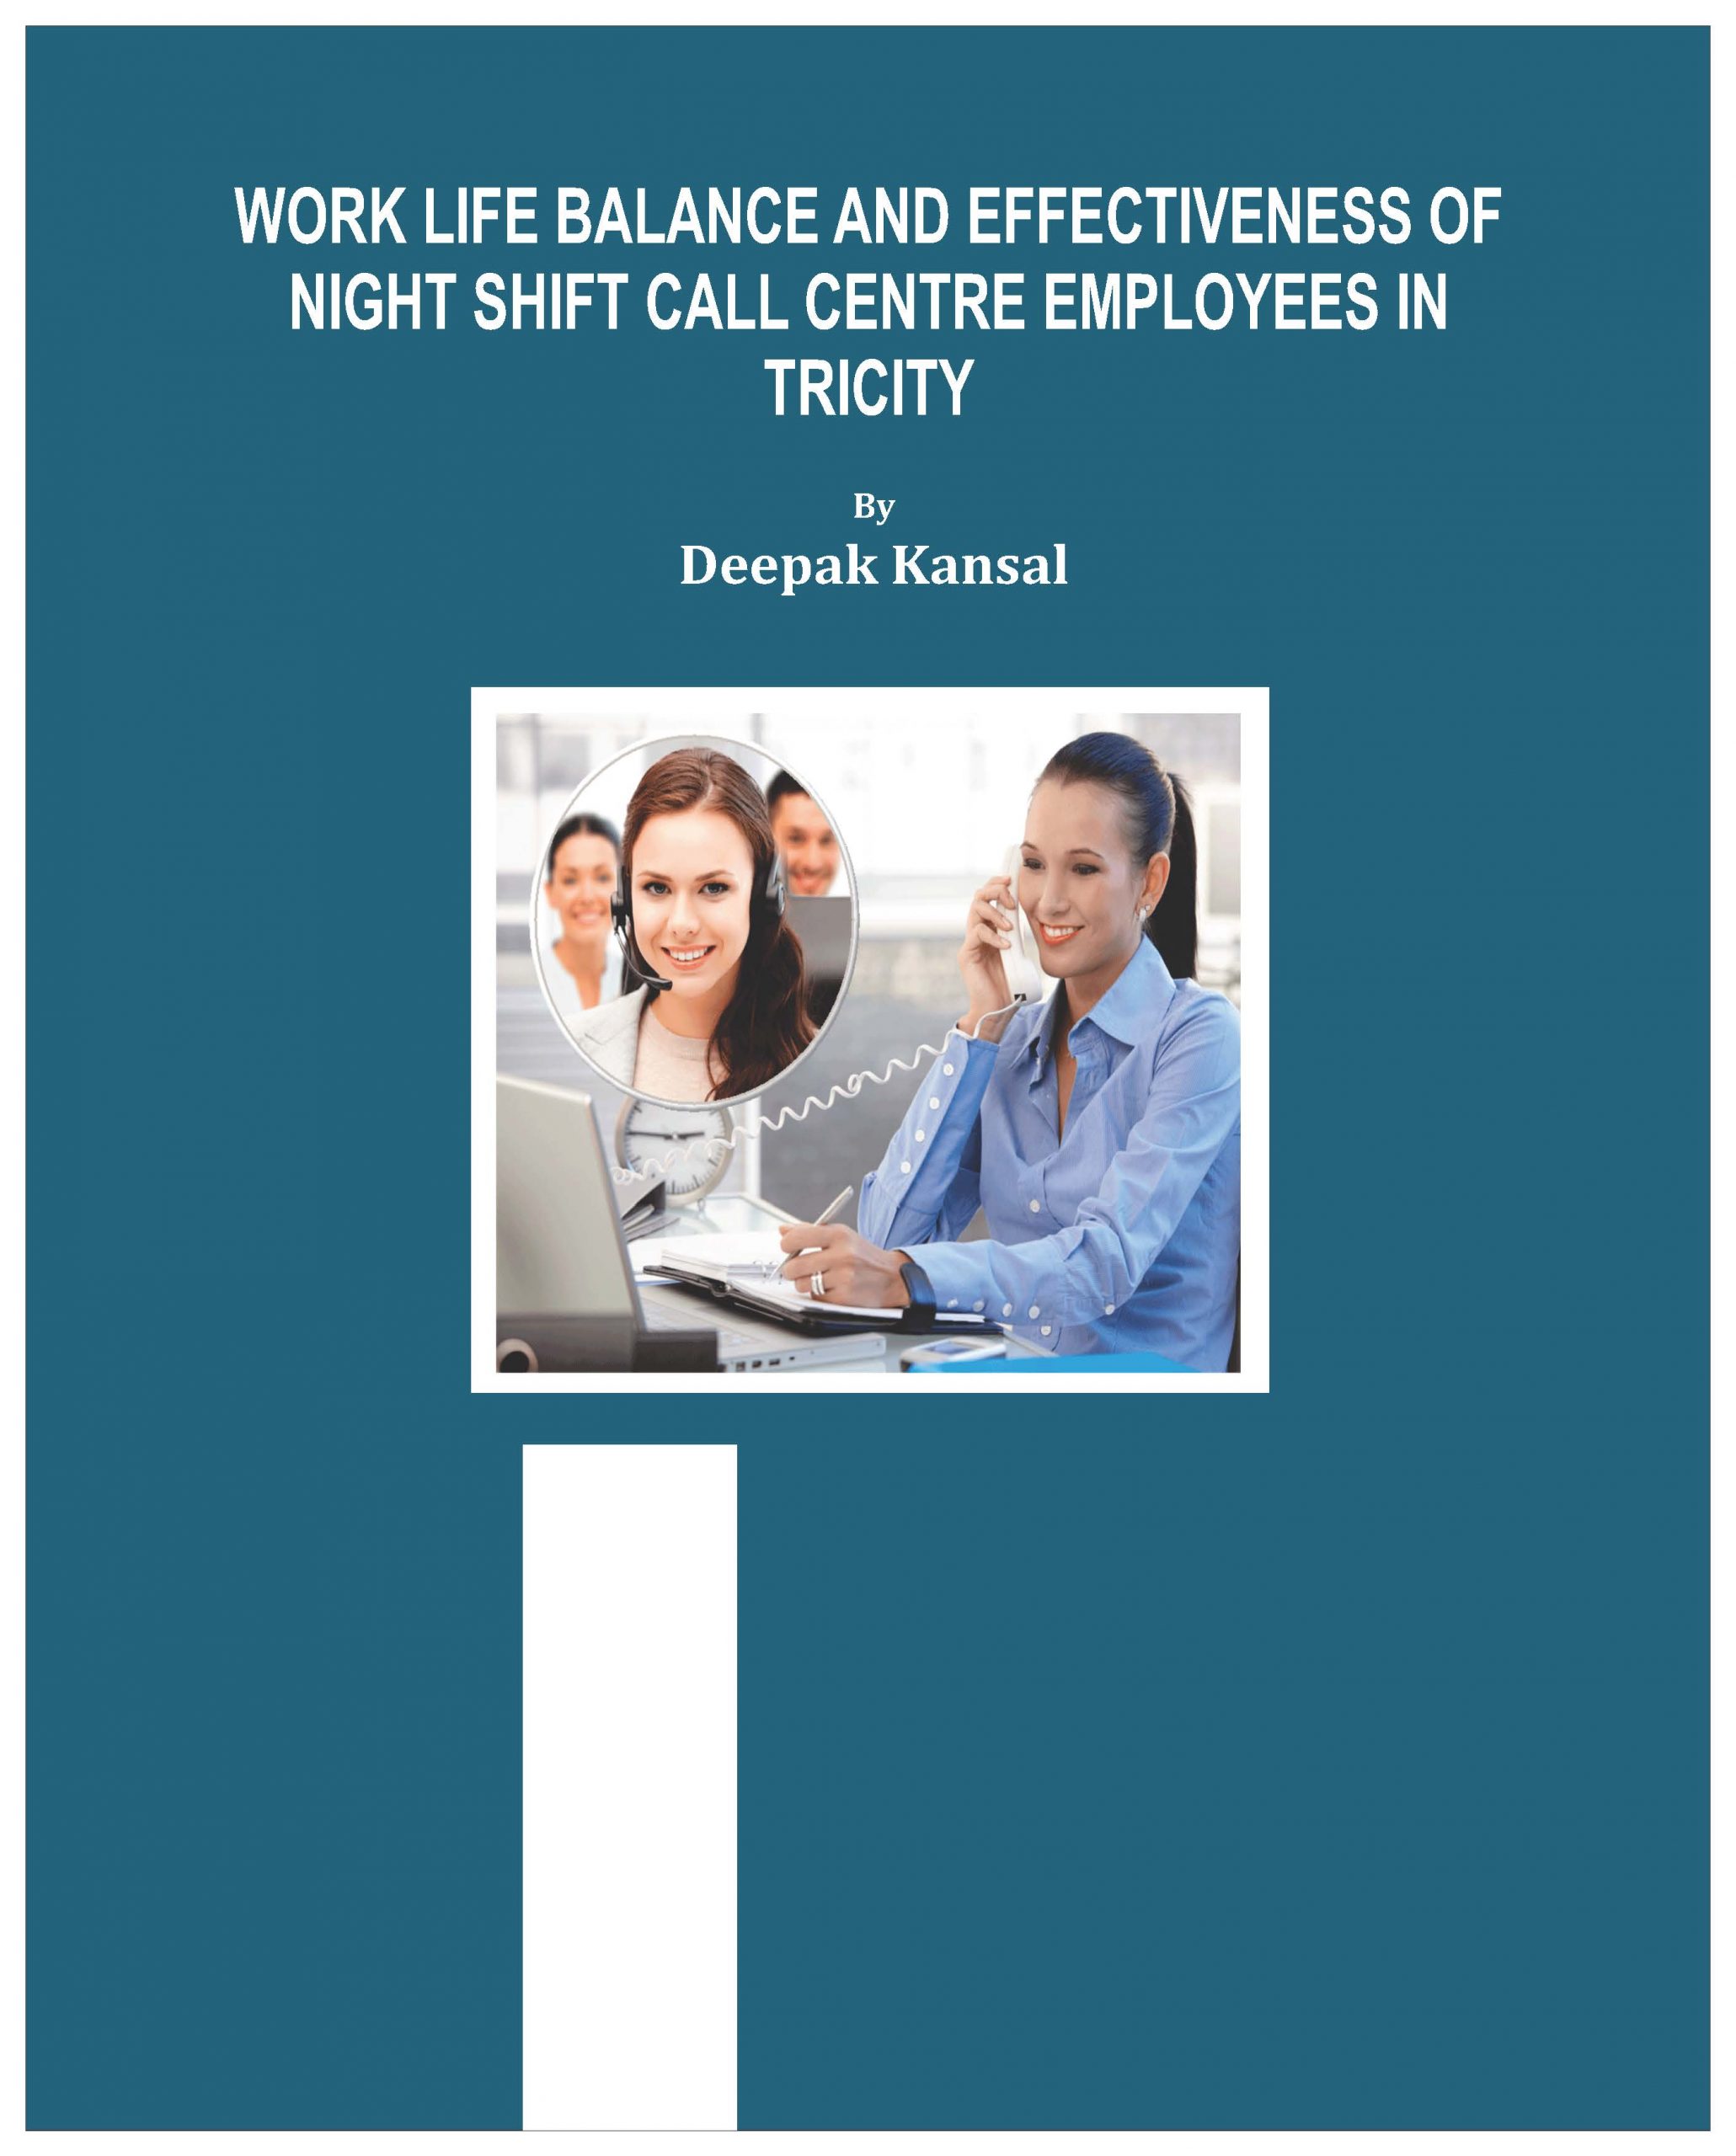 WORK LIFE BALANCE AND EFFECTIVENESS OF NIGHT SHIFT CALL CENTRE EMPLOYEES IN  TRICITY